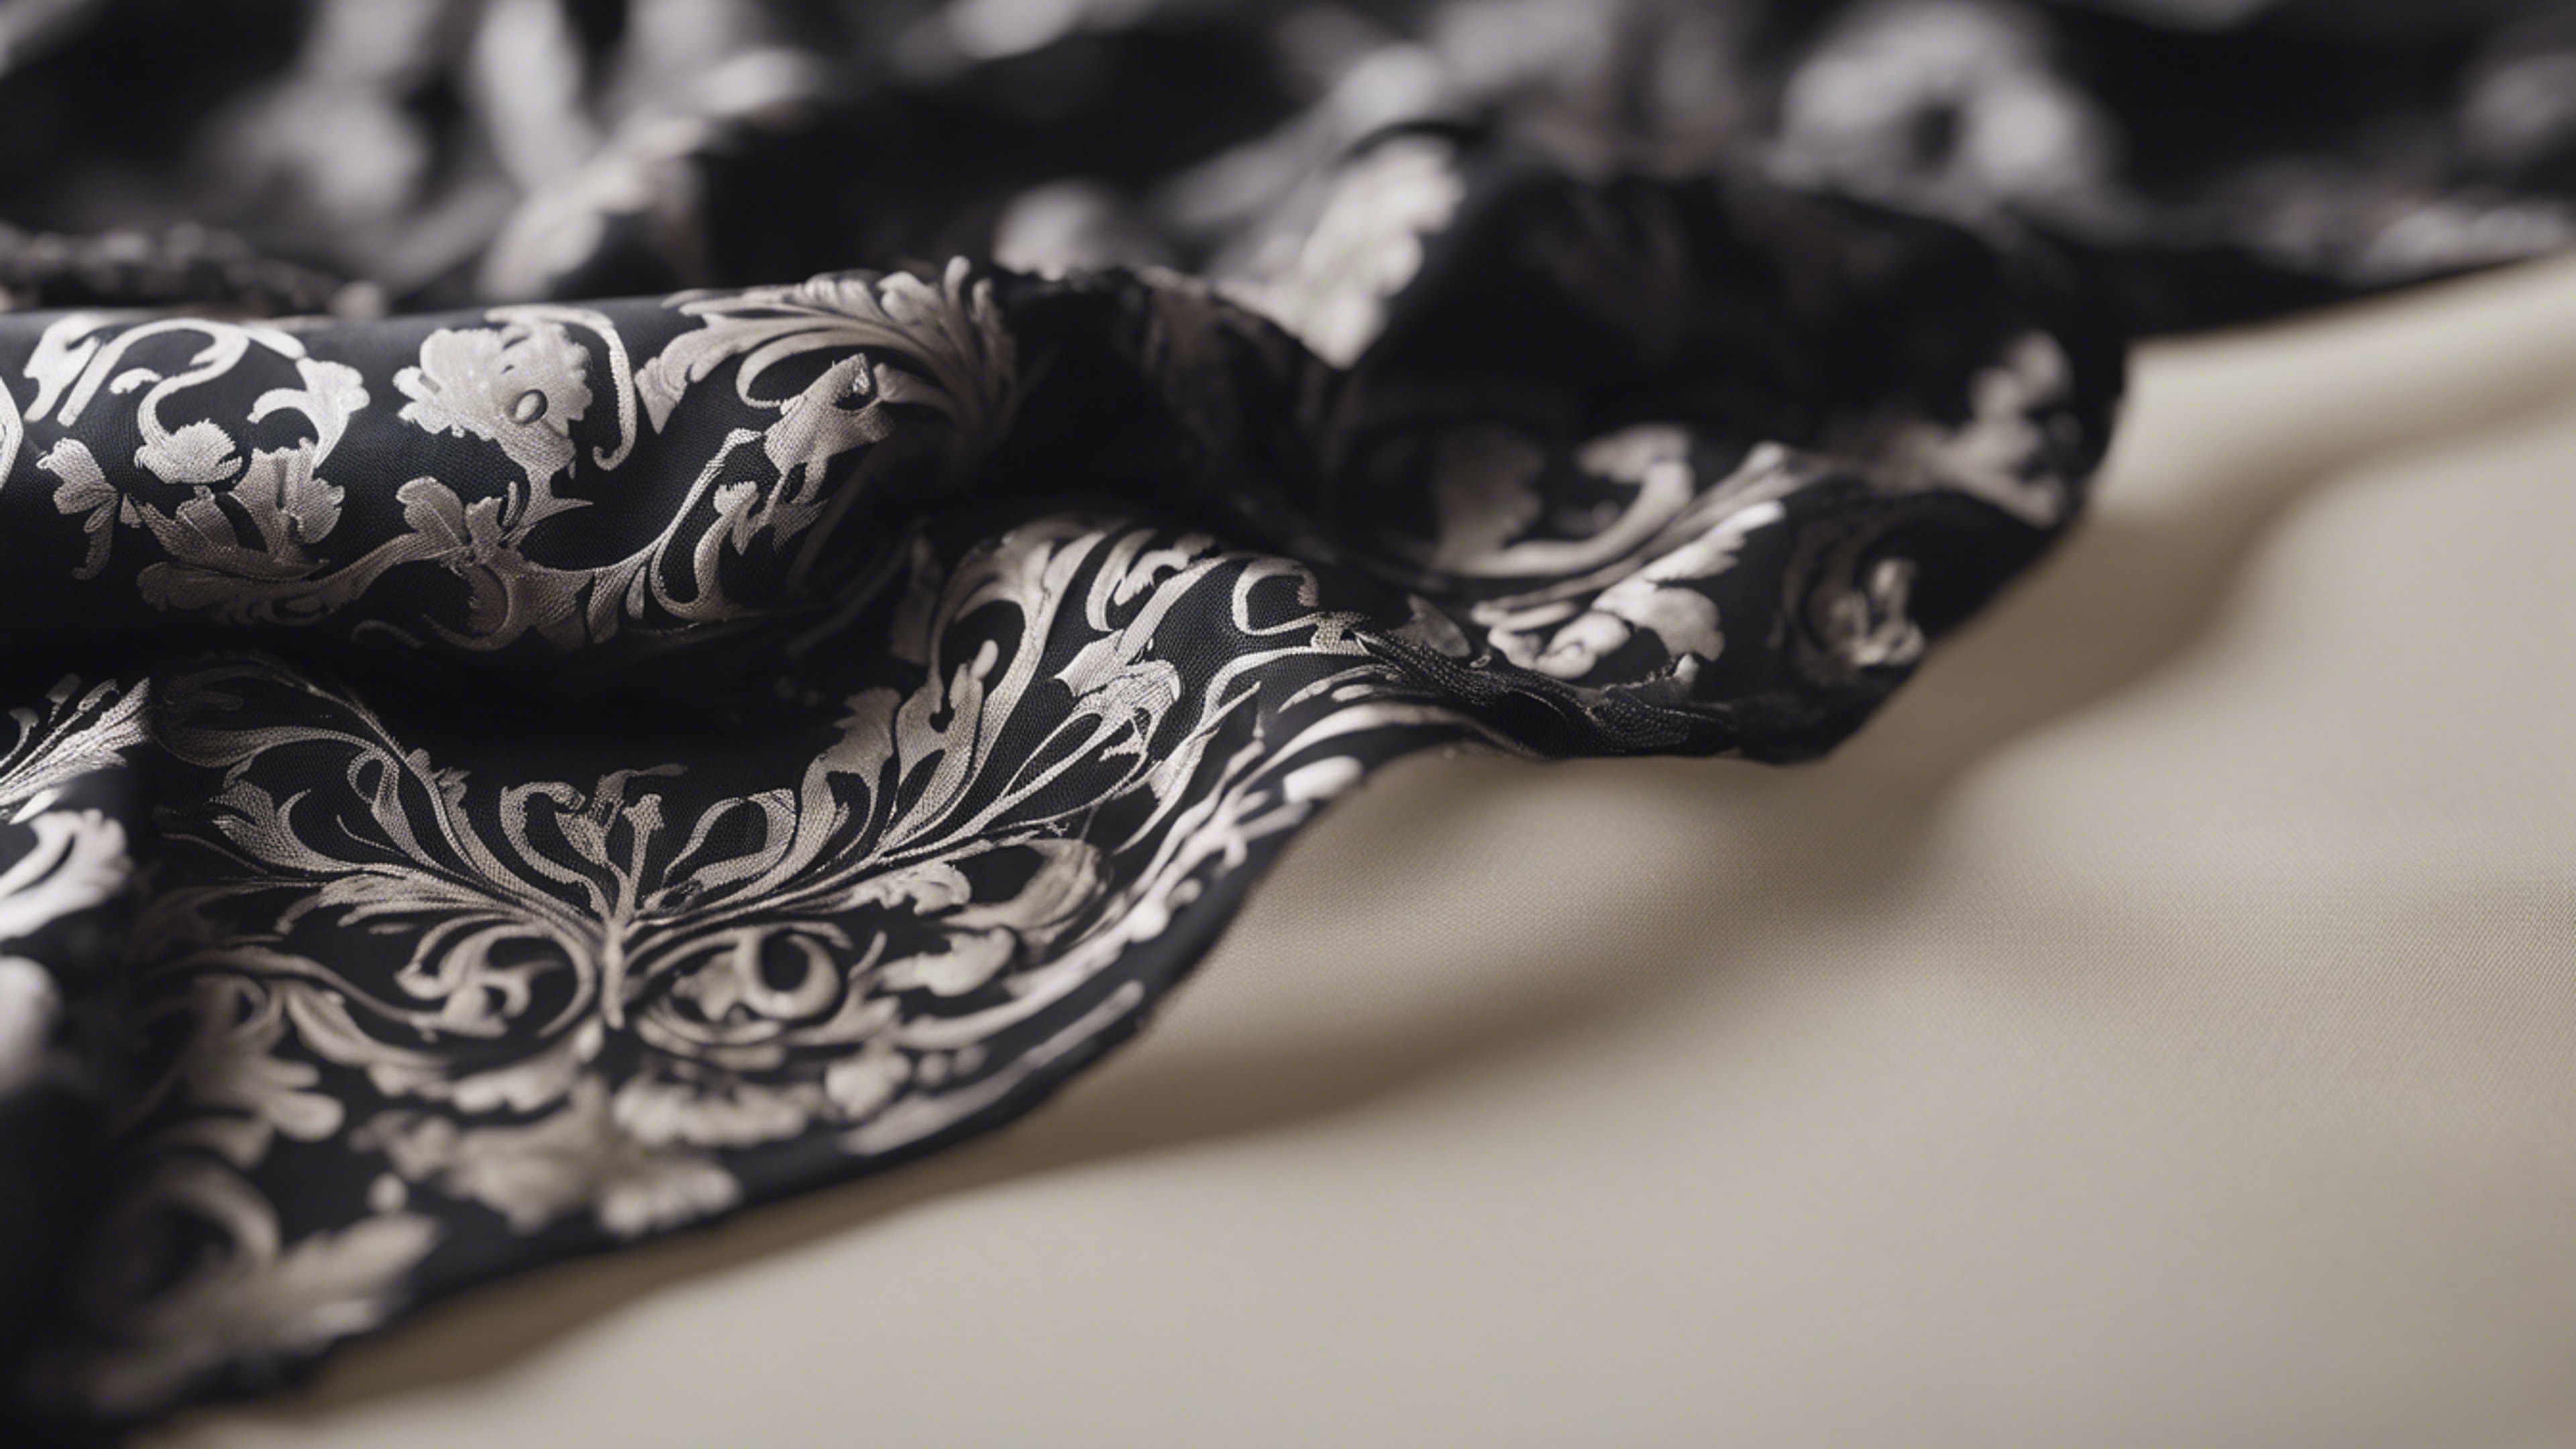 A piece of black damask fabric flowing in the wind on a neutral background. วอลล์เปเปอร์[14b62583c63644549a6a]